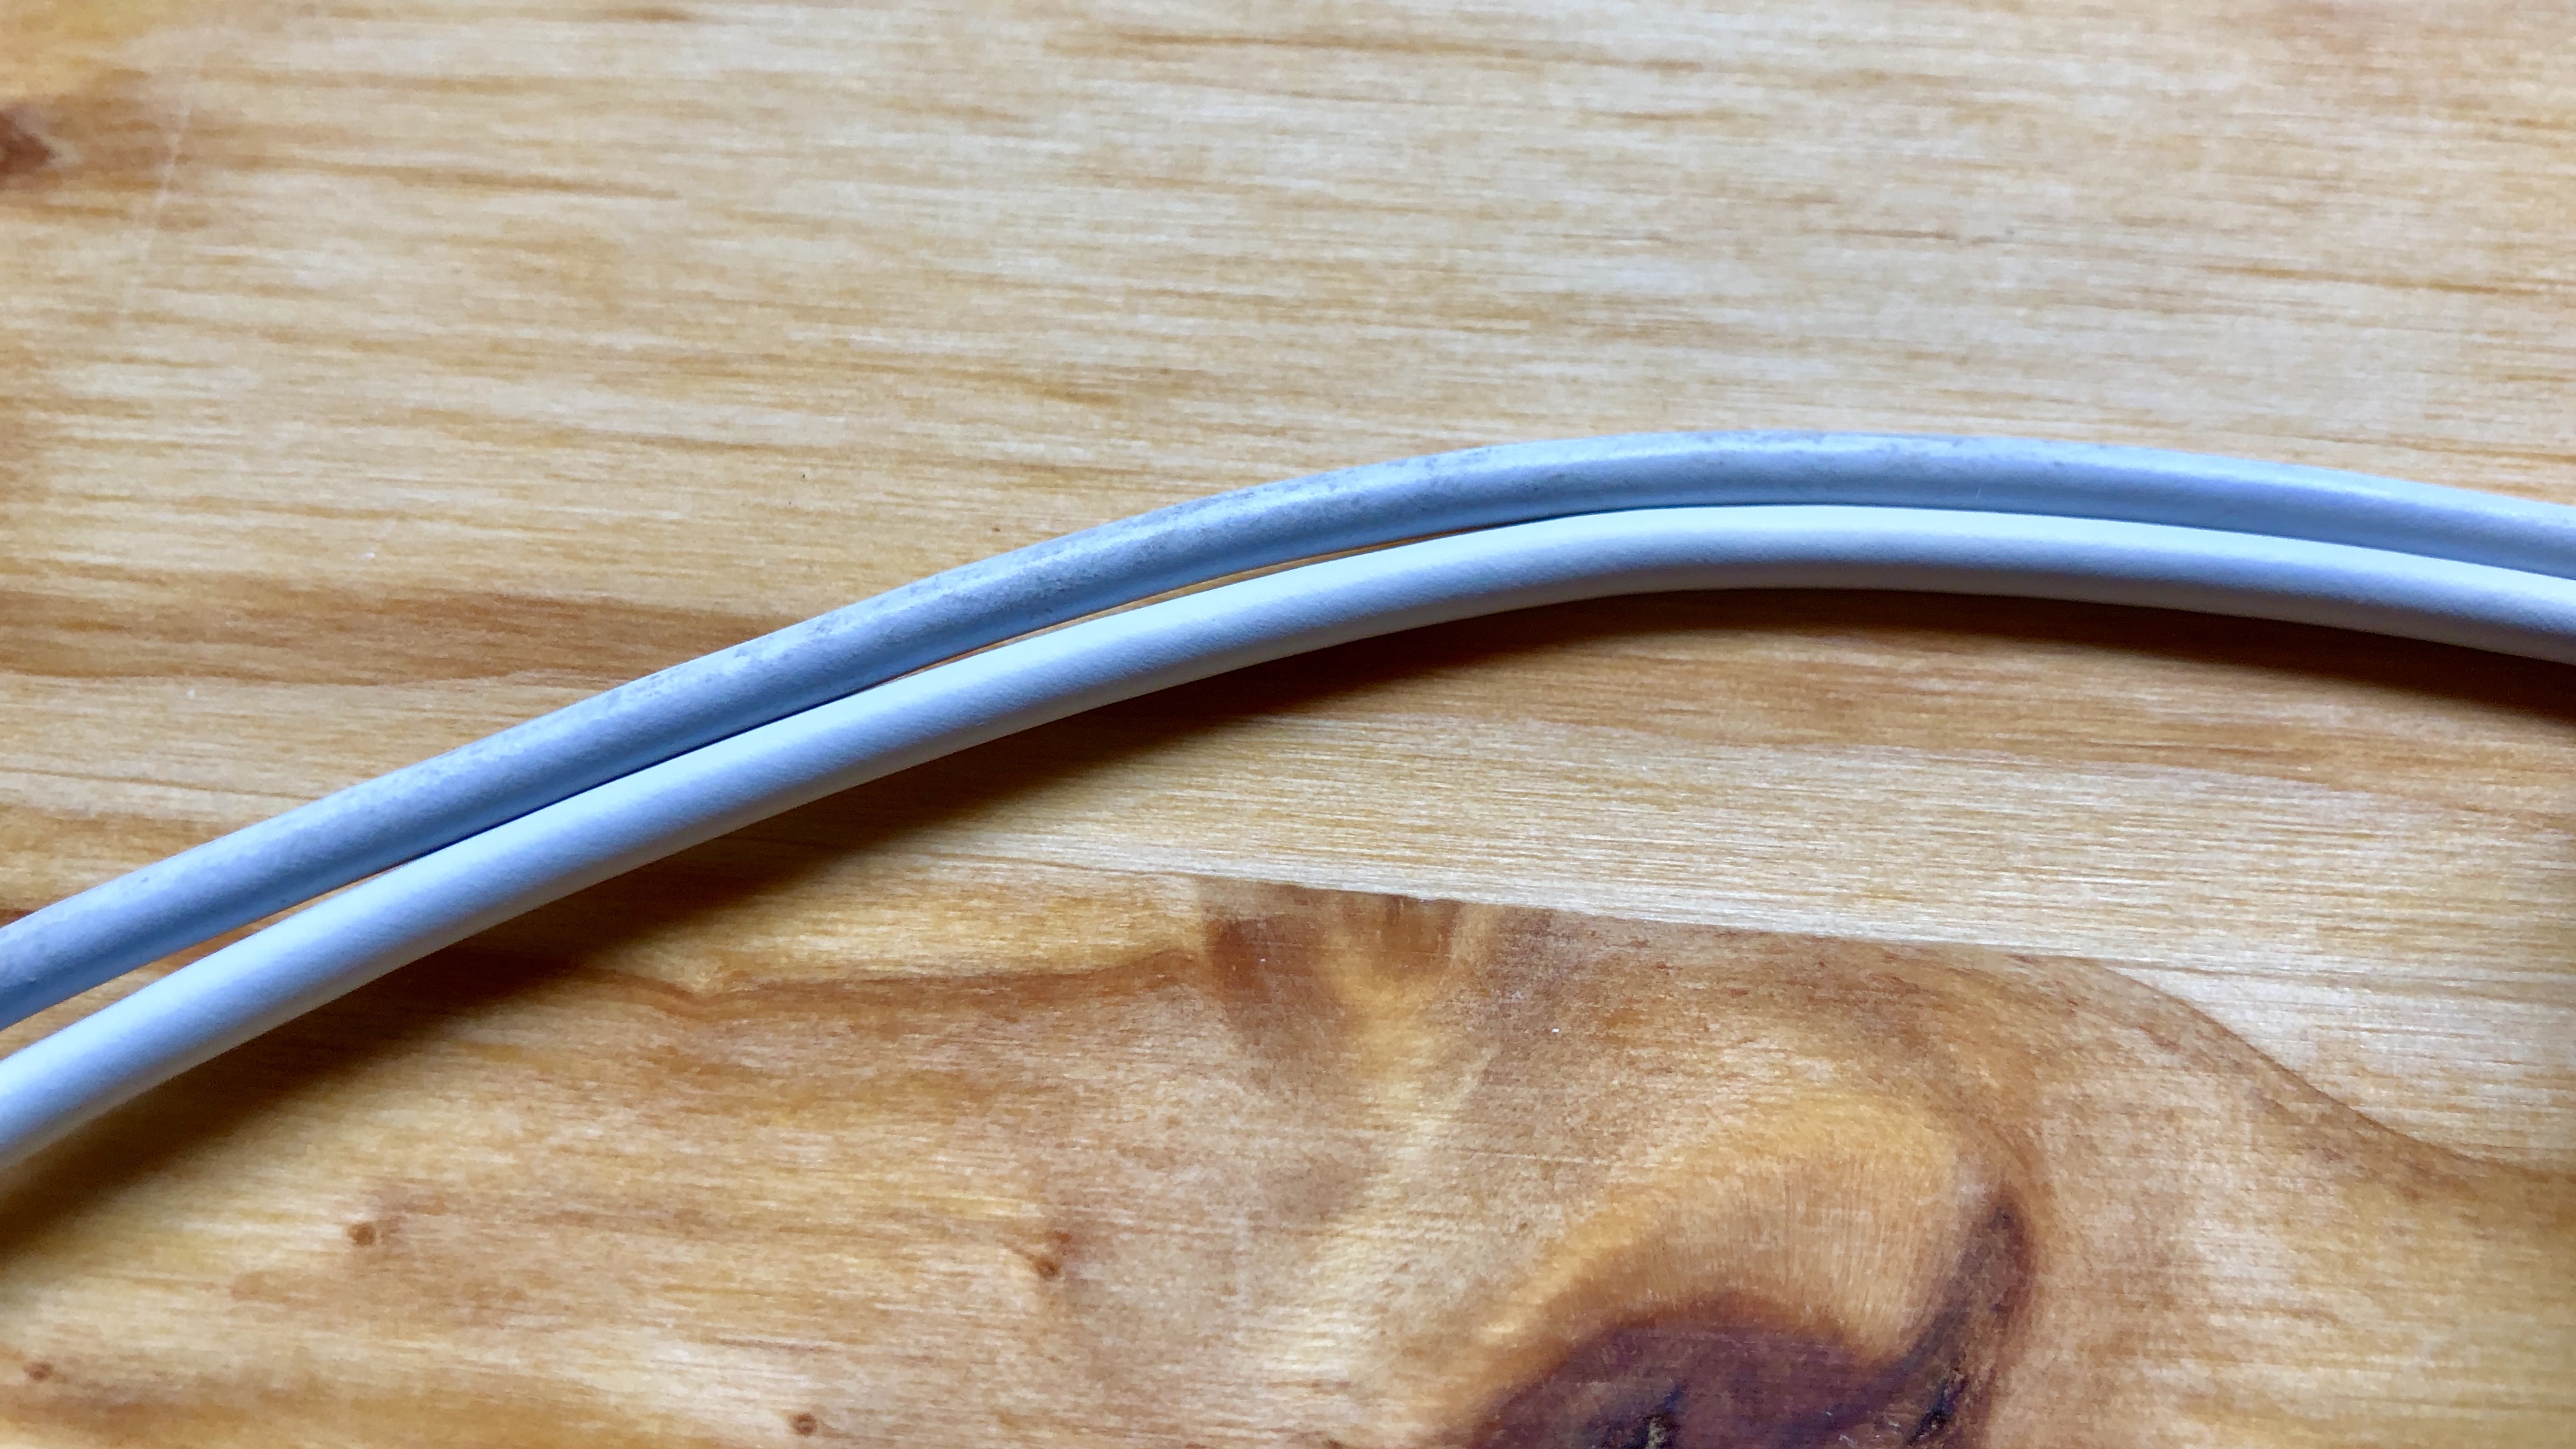 How to clean your Apple cables, keyboards, mice, trackpads, and more